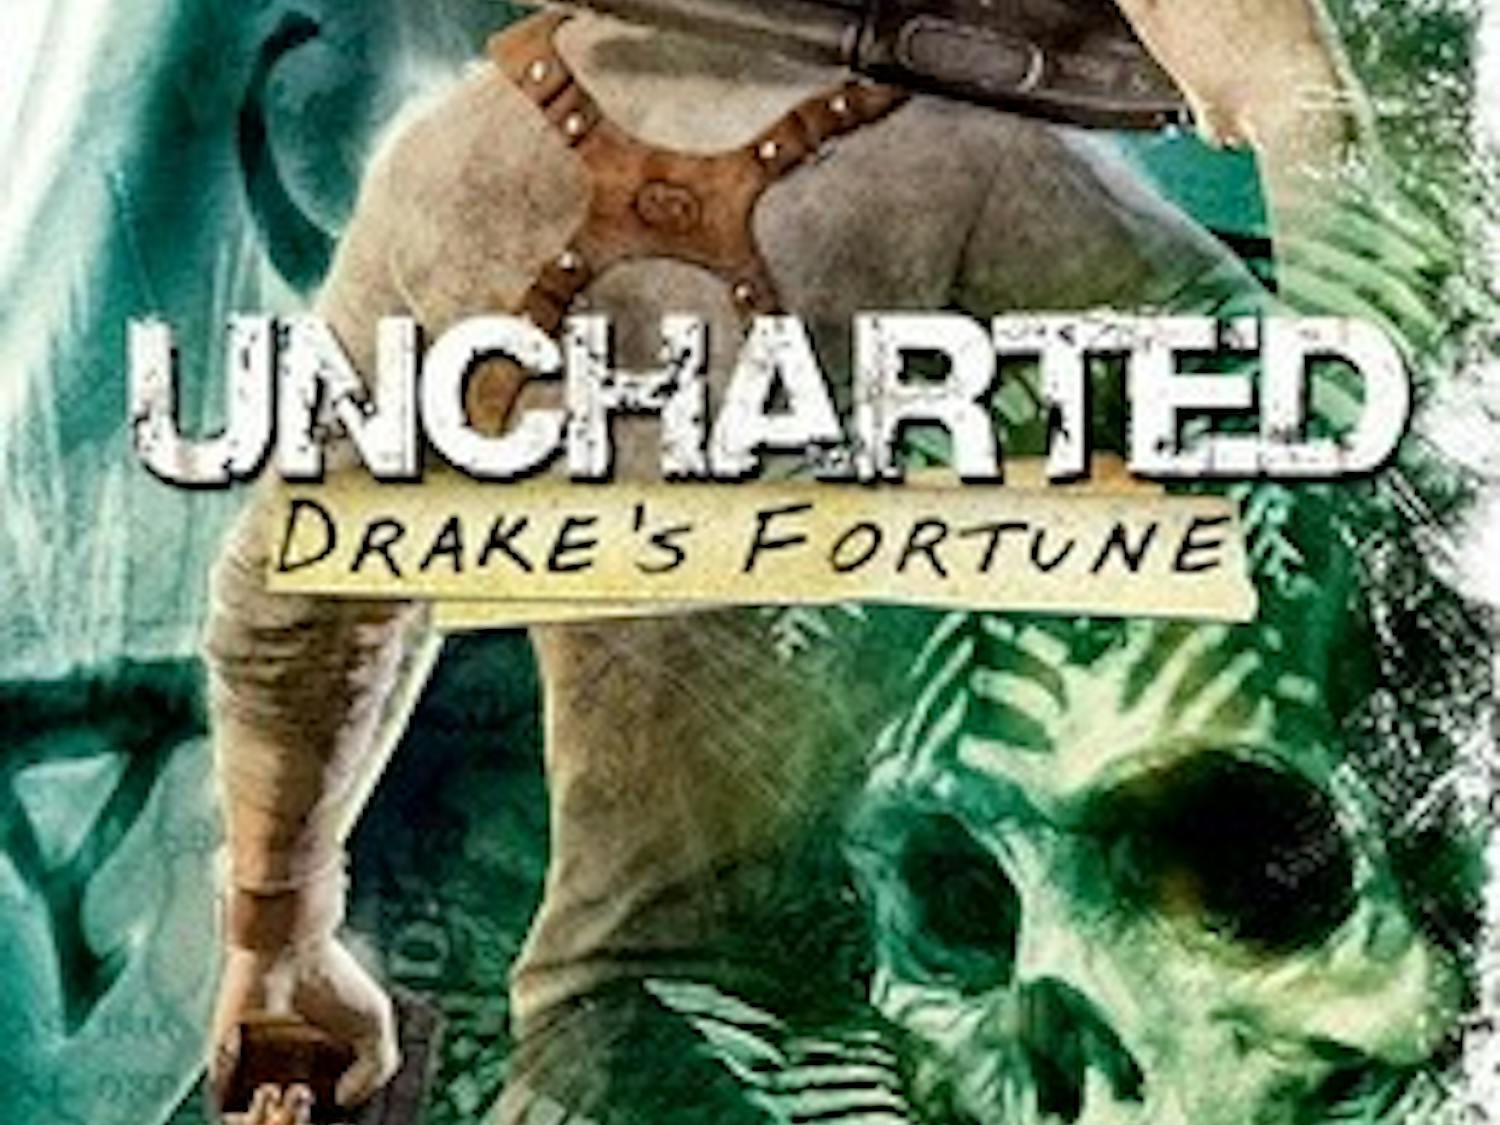 While all of their games contributed to their immense success, the "Uncharted" series was the biggest turning point of Naughty Dog's career.